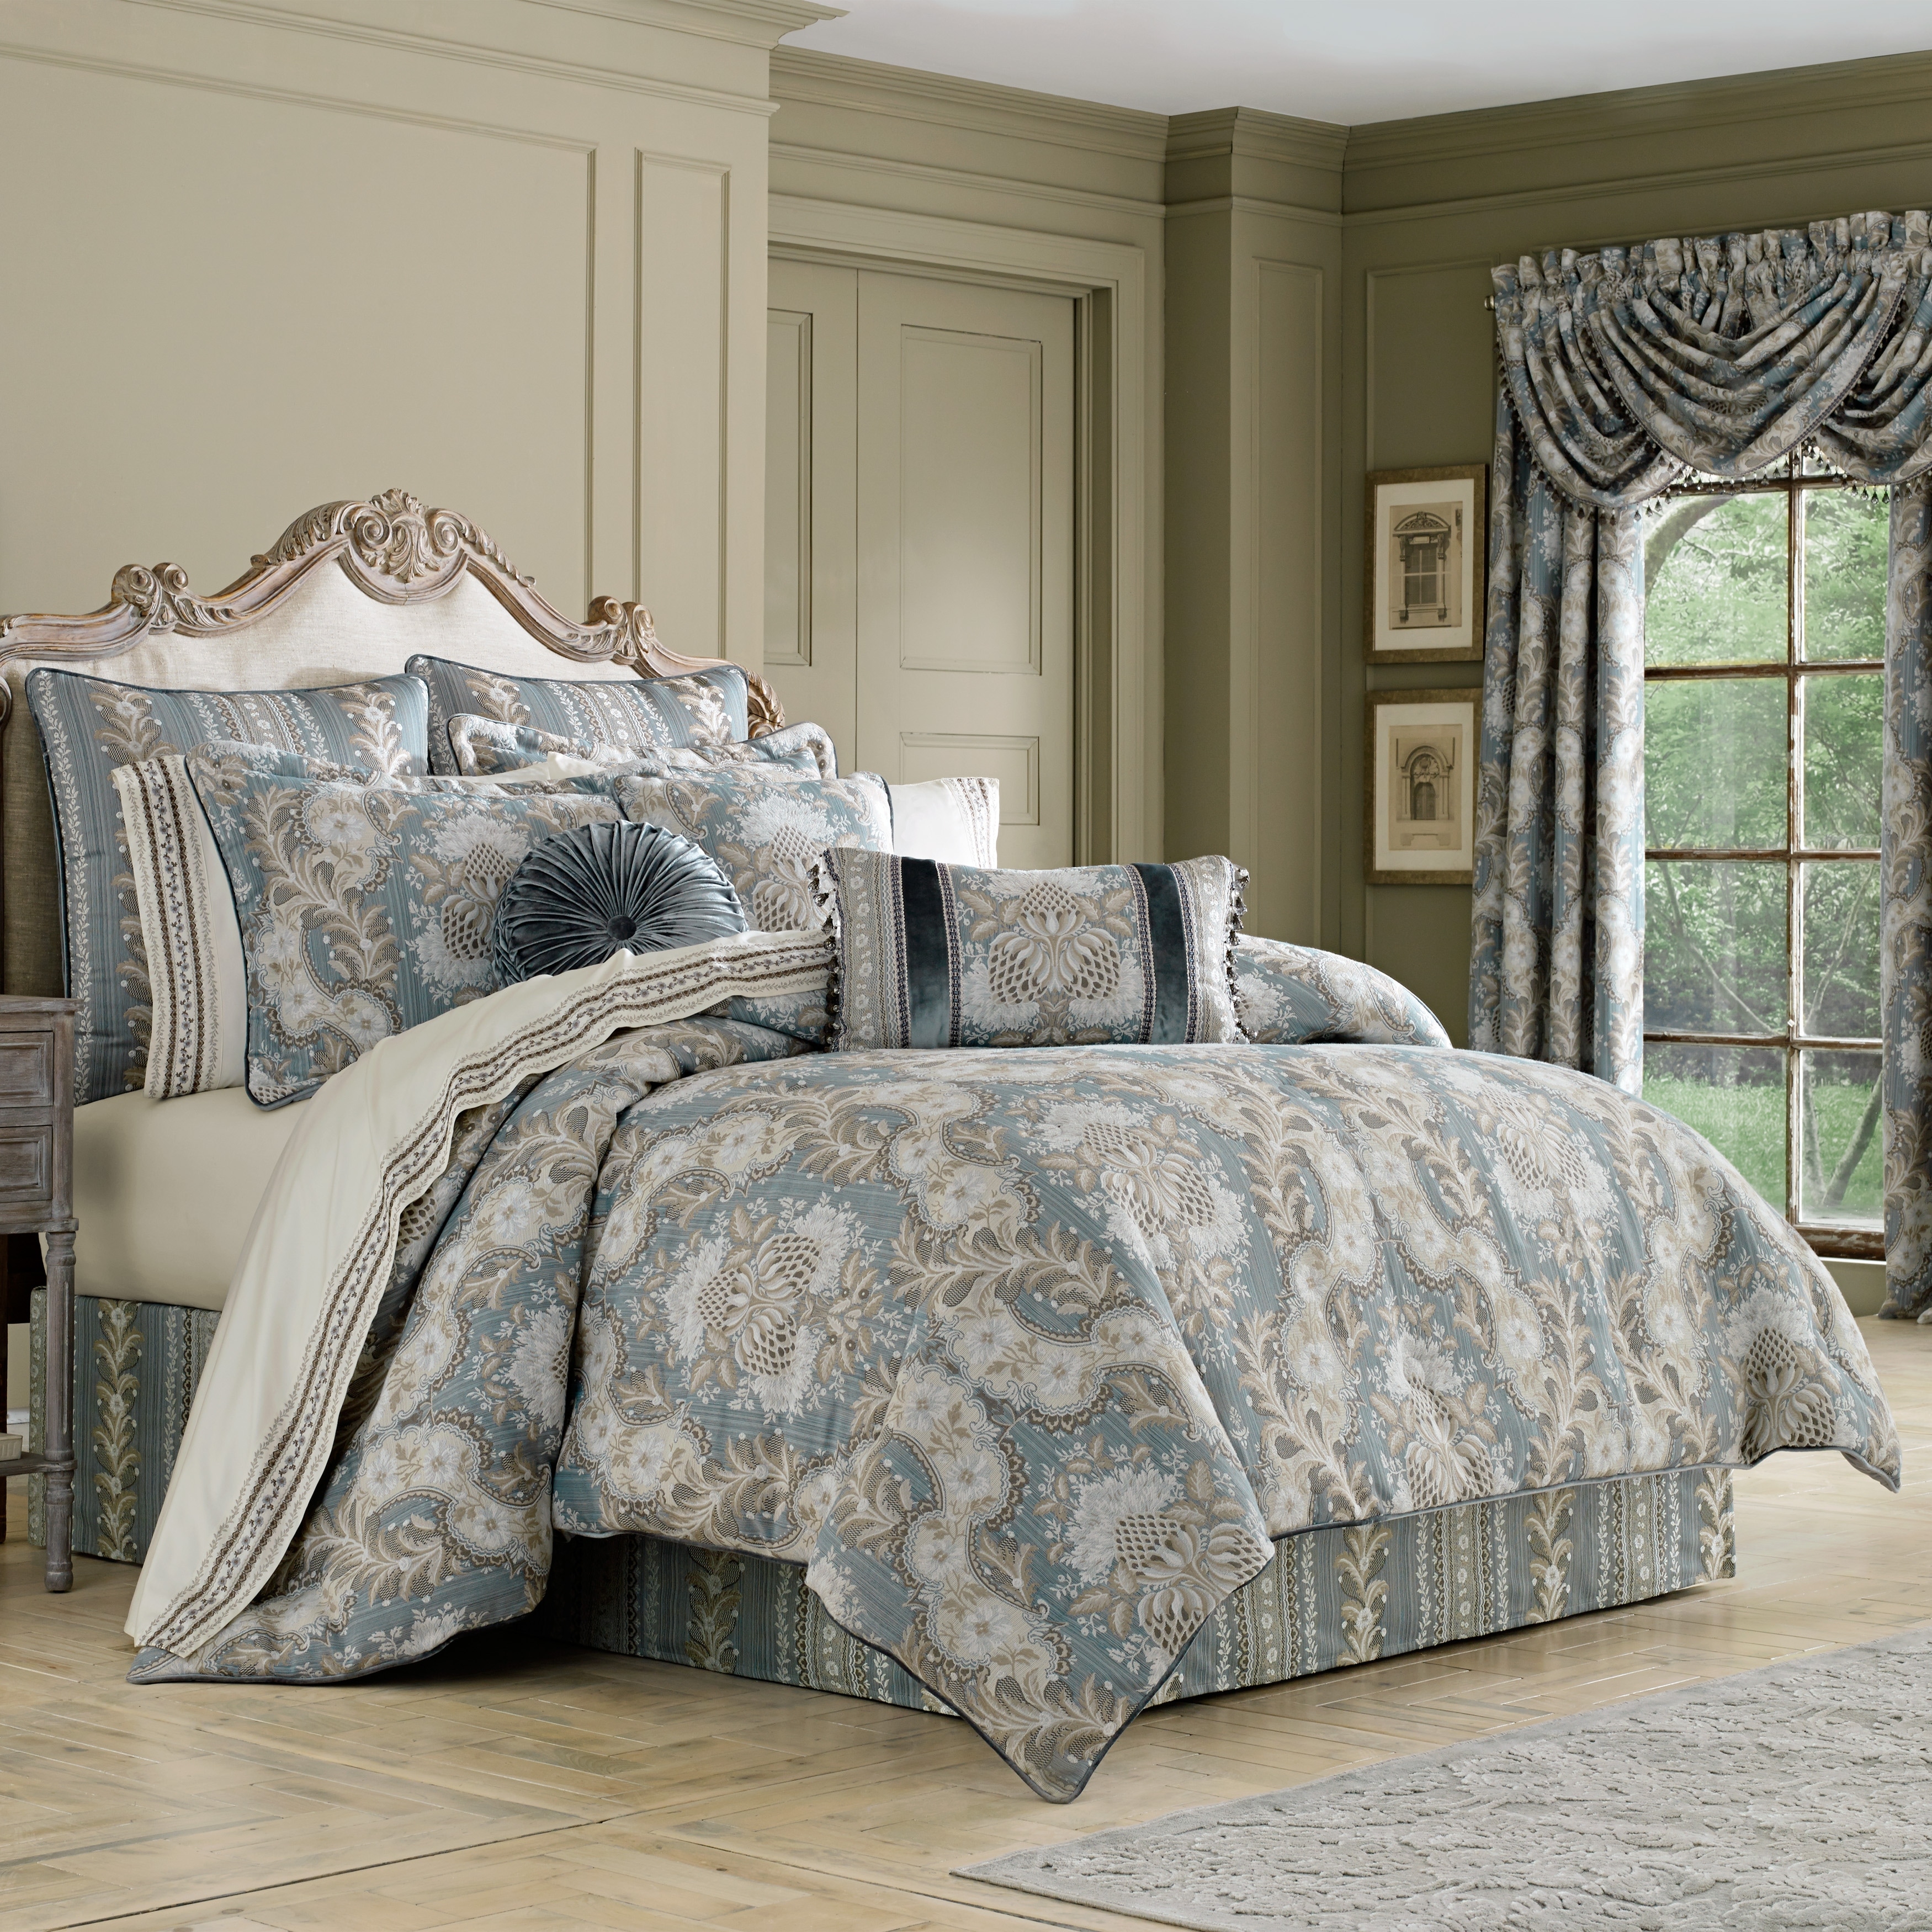 https://ak1.ostkcdn.com/images/products/is/images/direct/cc23269902b412b80a2e07d1a071b625c25aea61/J.-Queen-New-York-Crystal-Palace-Comforter-Set.jpg